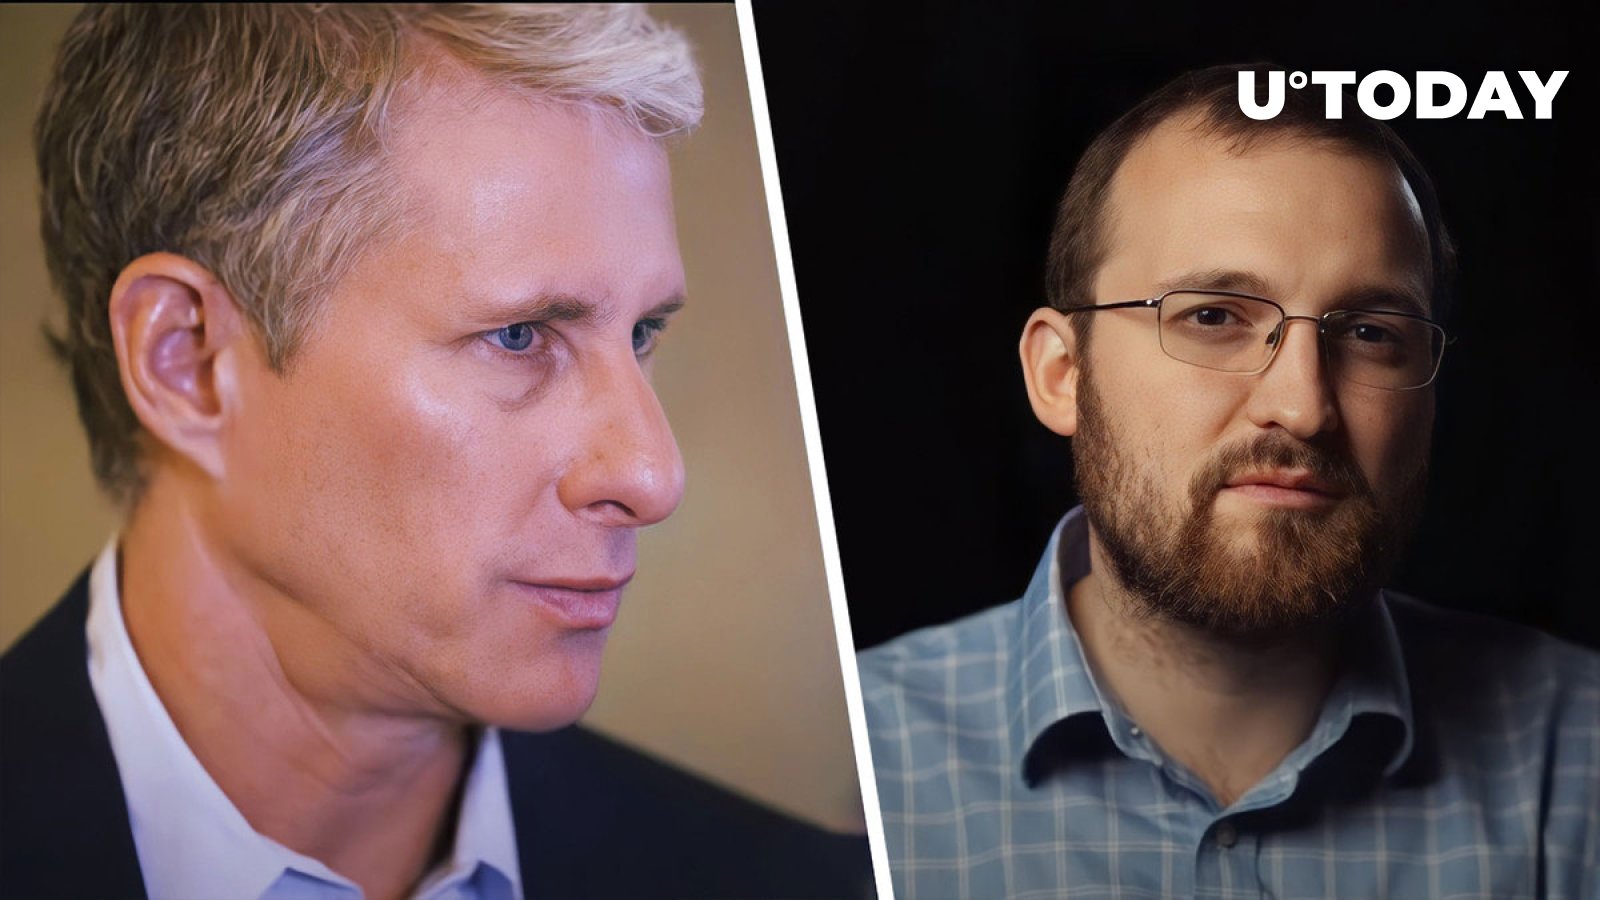 Ripple Co-founder Says Why He Admires Charles Hoskinson